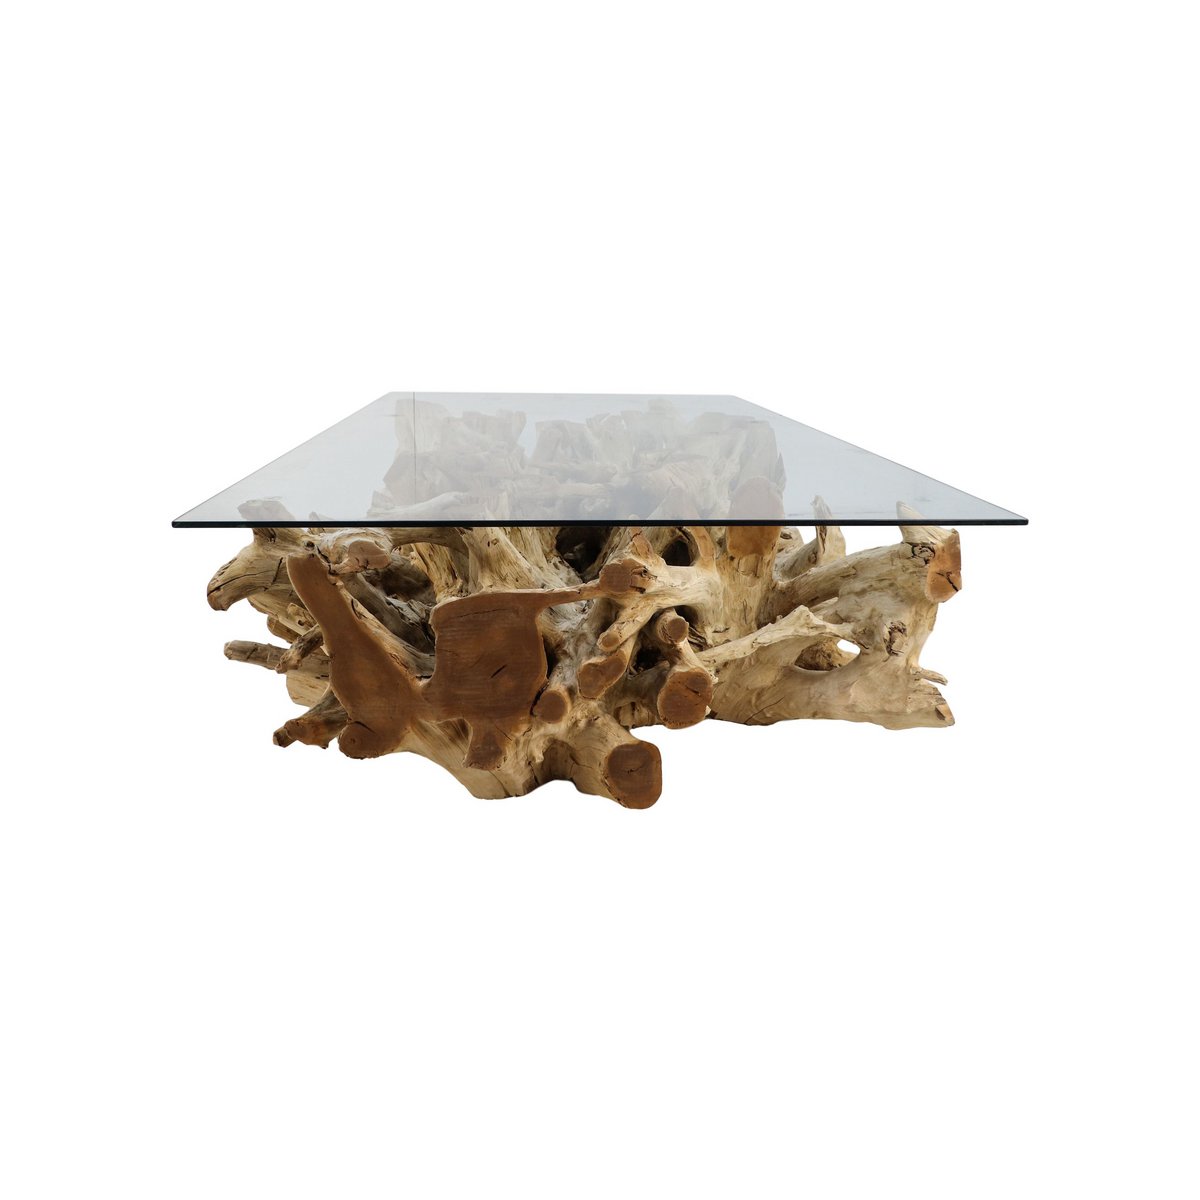 Coffee table - 140x90x44 - Natural/Bleached - Teak rootWood/Glass